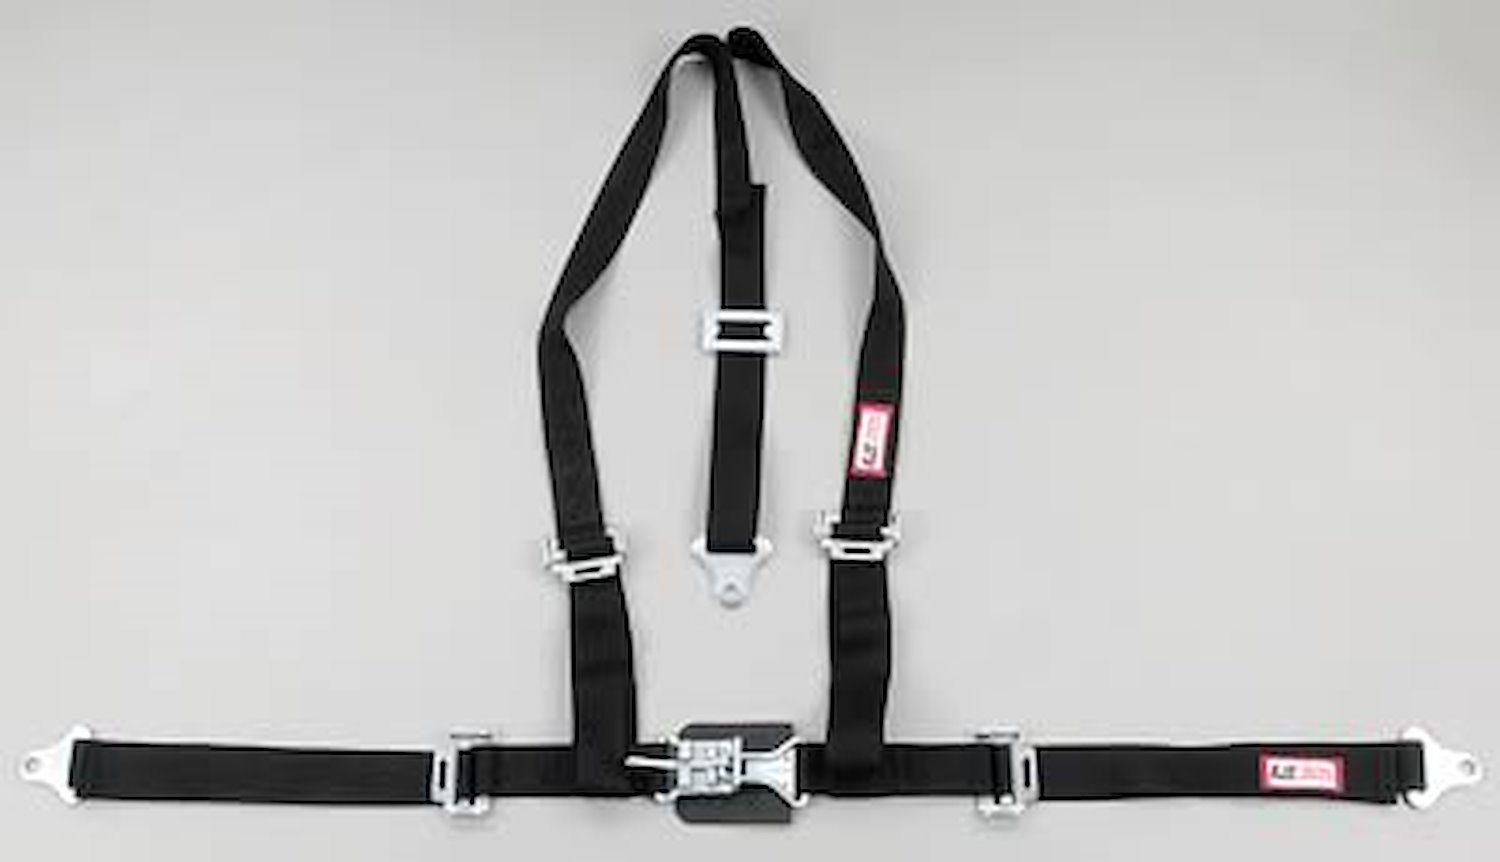 NON-SFI L&L HARNESS 2 PULL UP Lap Belt SEWN IN 2 S.H. Individual ROLL BAR Mount ALL WRAP ENDS RED